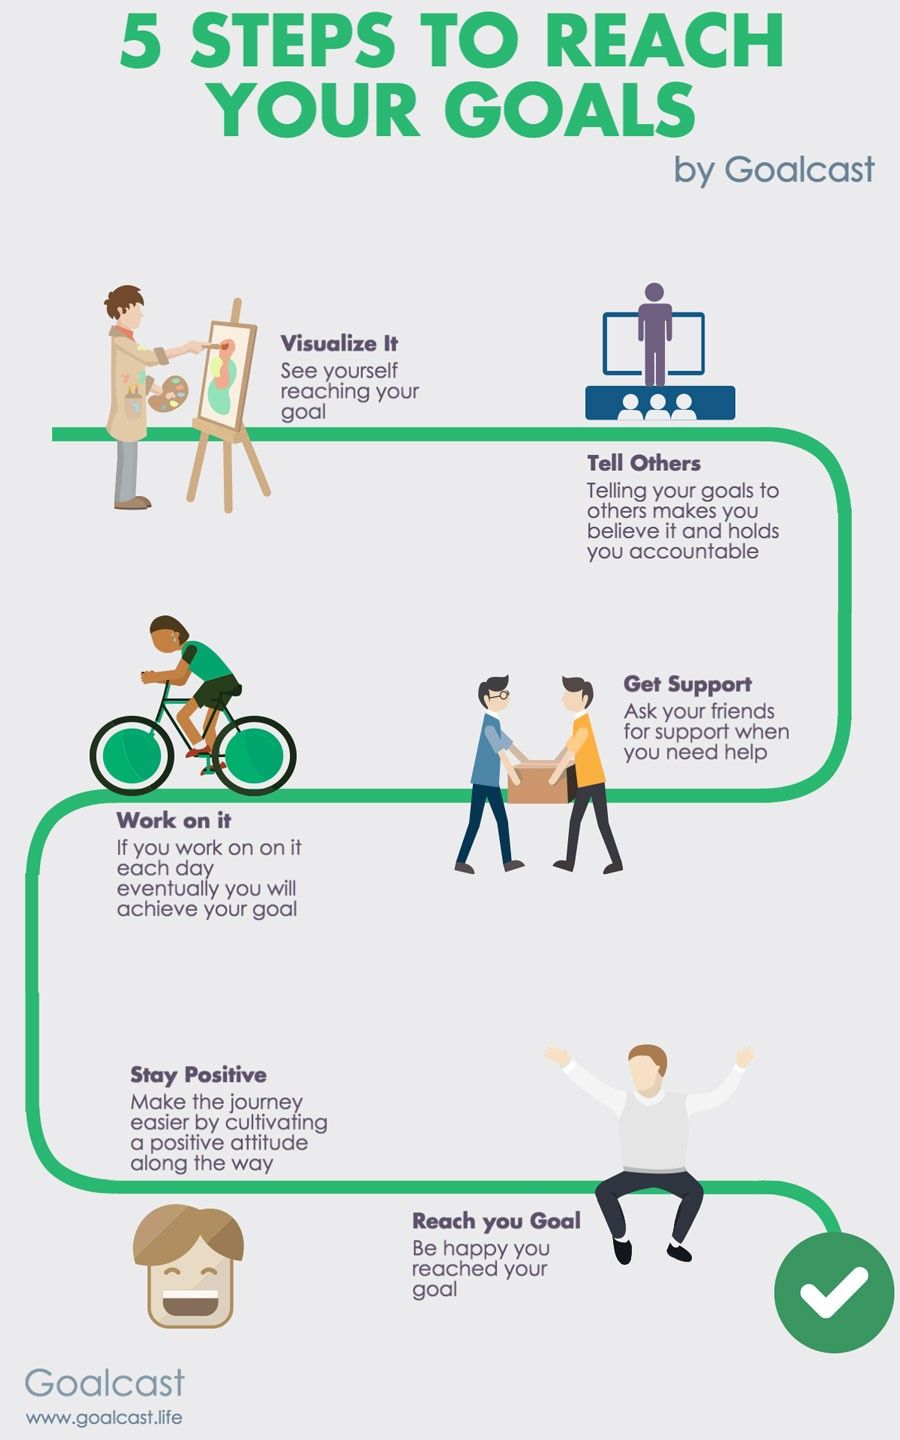 5 steps to reach your goal infographic